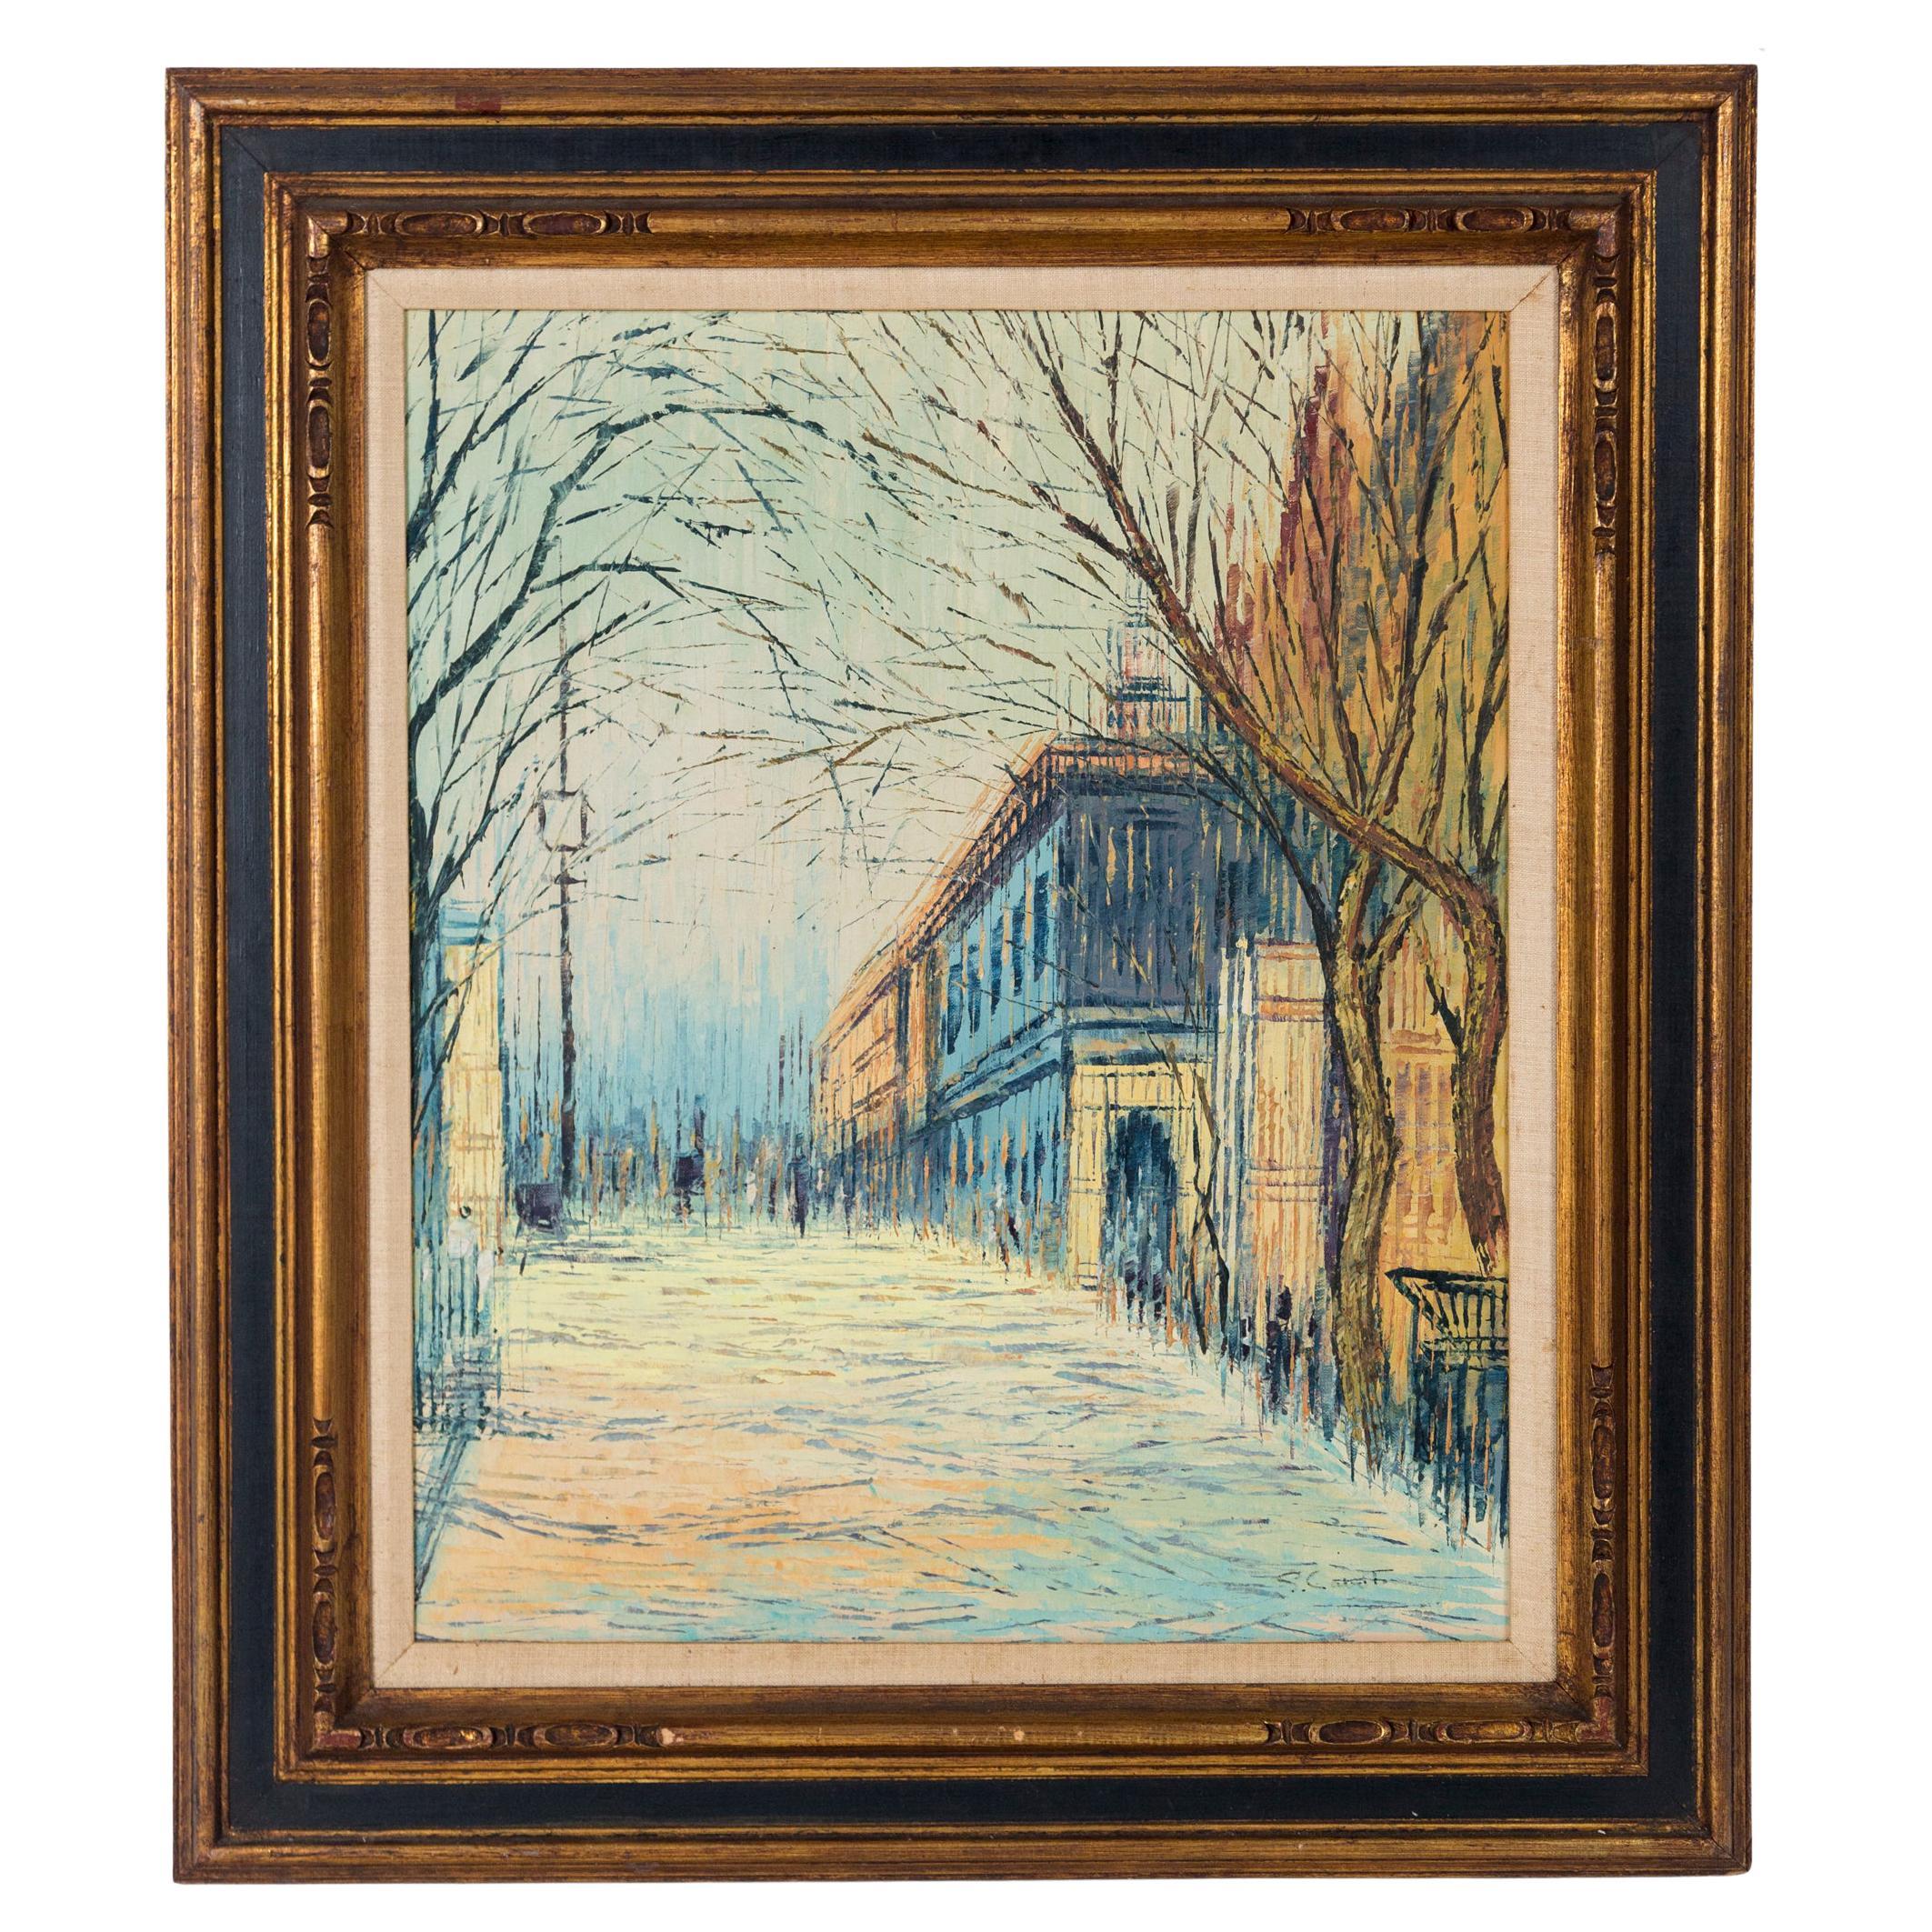 Framed Oil Painting, 'Cityscape', 20th Century